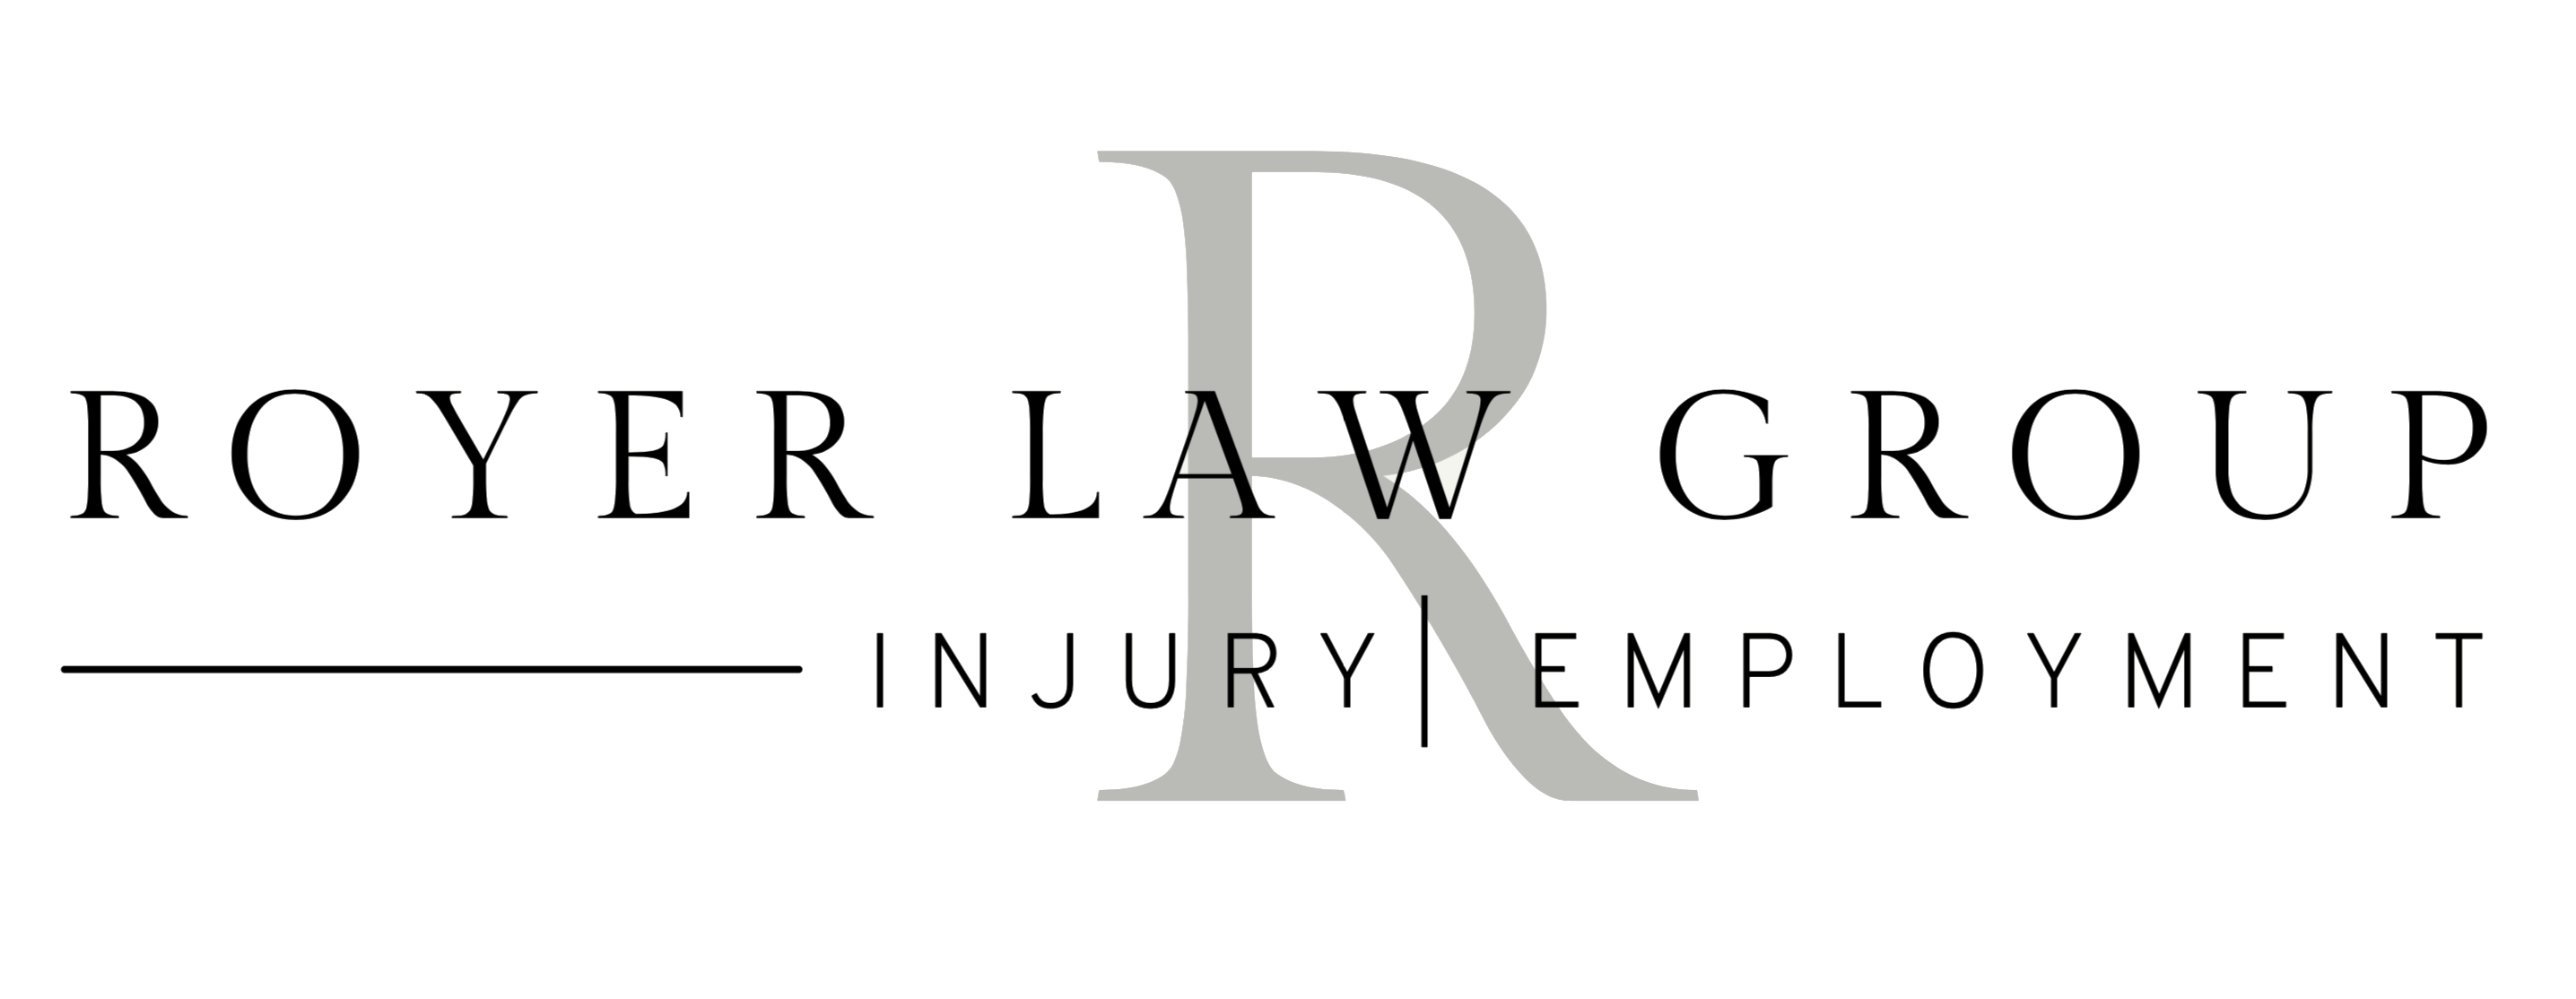 Royer Law Group Logo Transparent